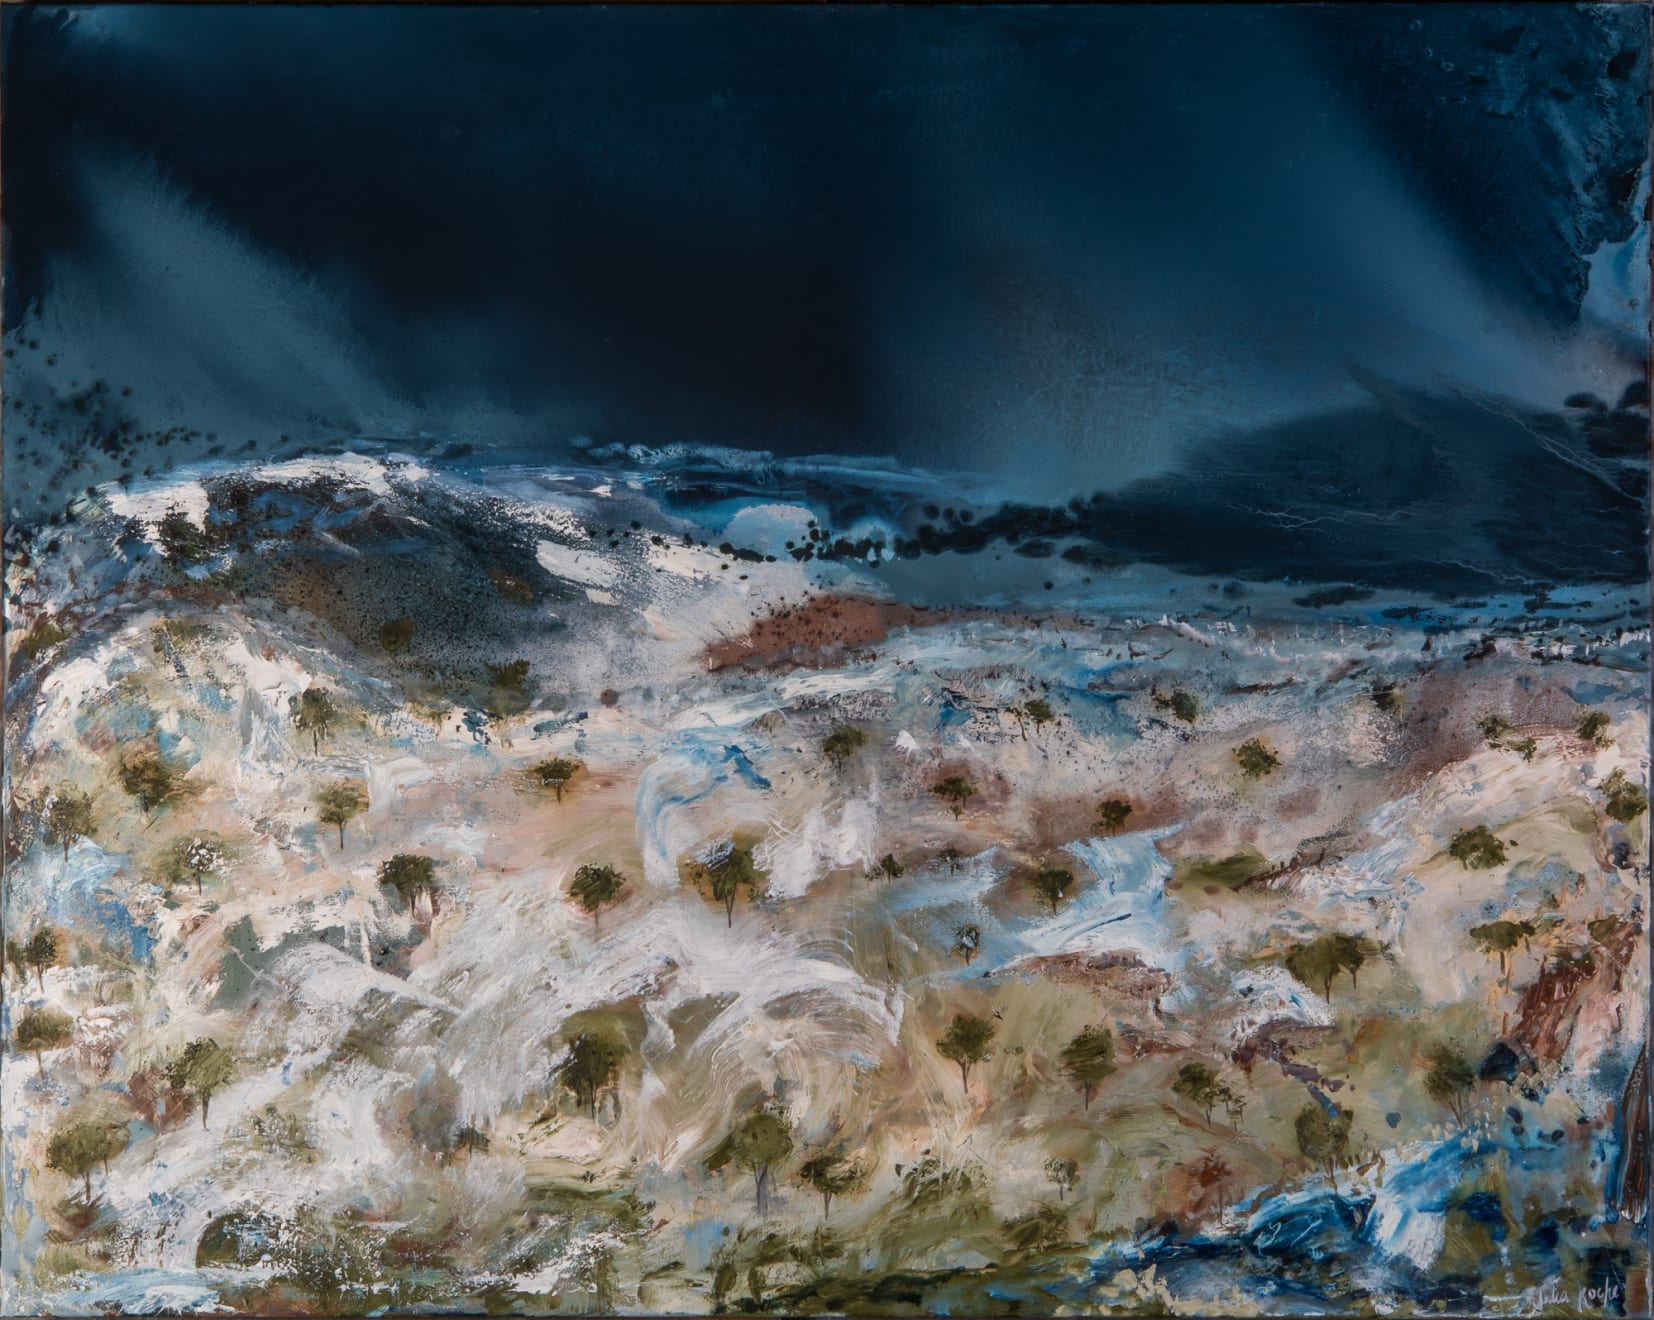 Under Cover of Night Oil and Mixed Media on Canvas Stretched 153 x 123 cm AUD $4950 GBP £2465 USD $3305 SOLD